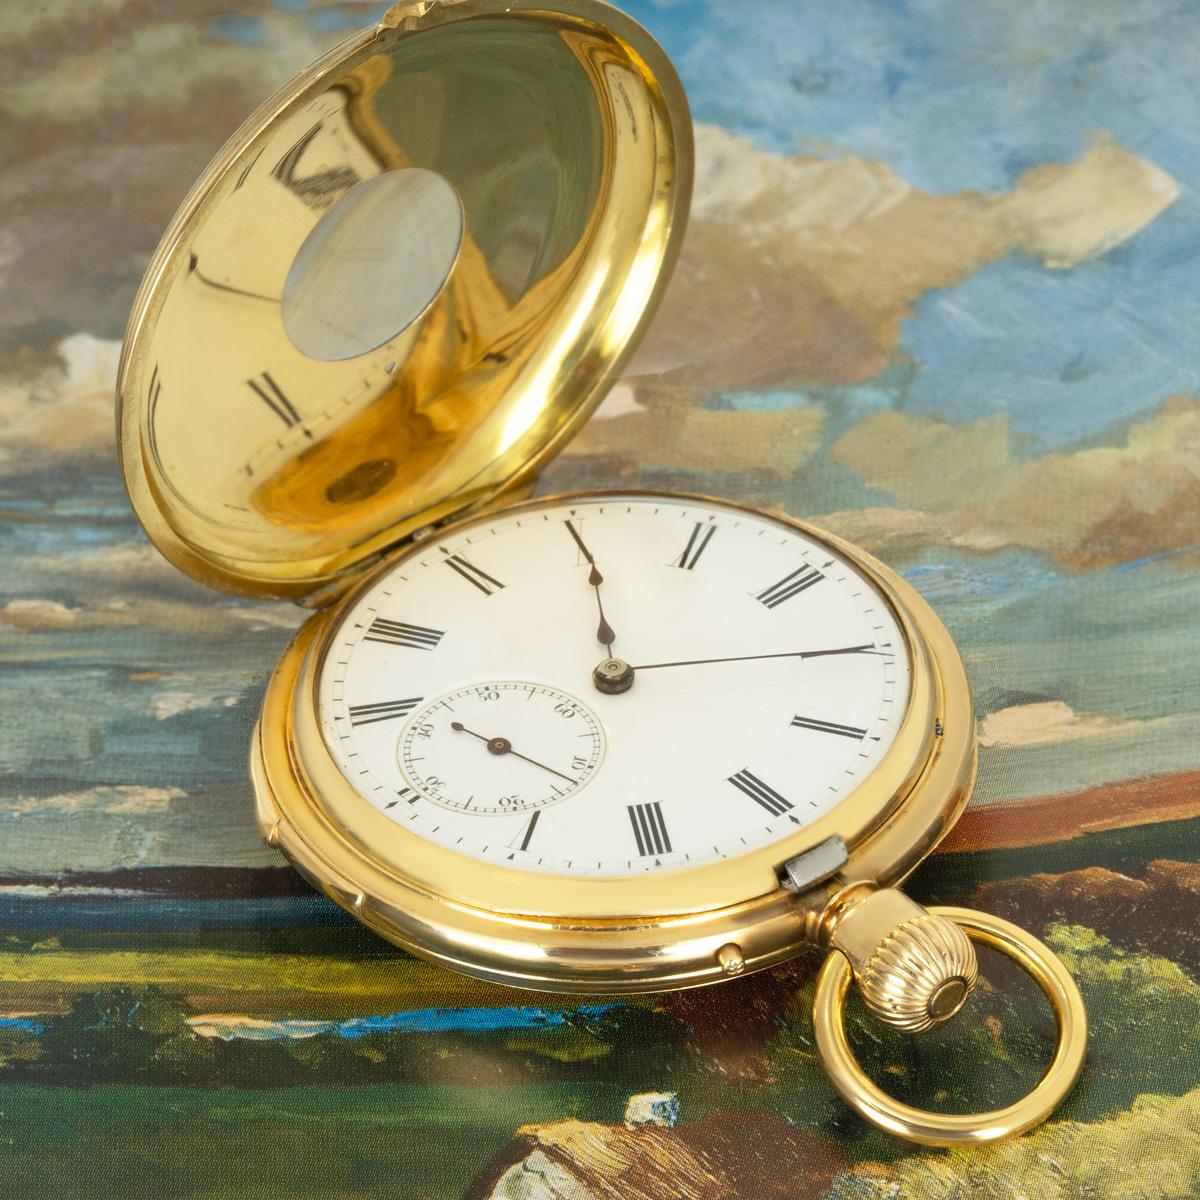 J.M. Badollet & Cie. A Gold and Enamel Half Hunter Pocket Watch C1880 In Good Condition For Sale In London, GB